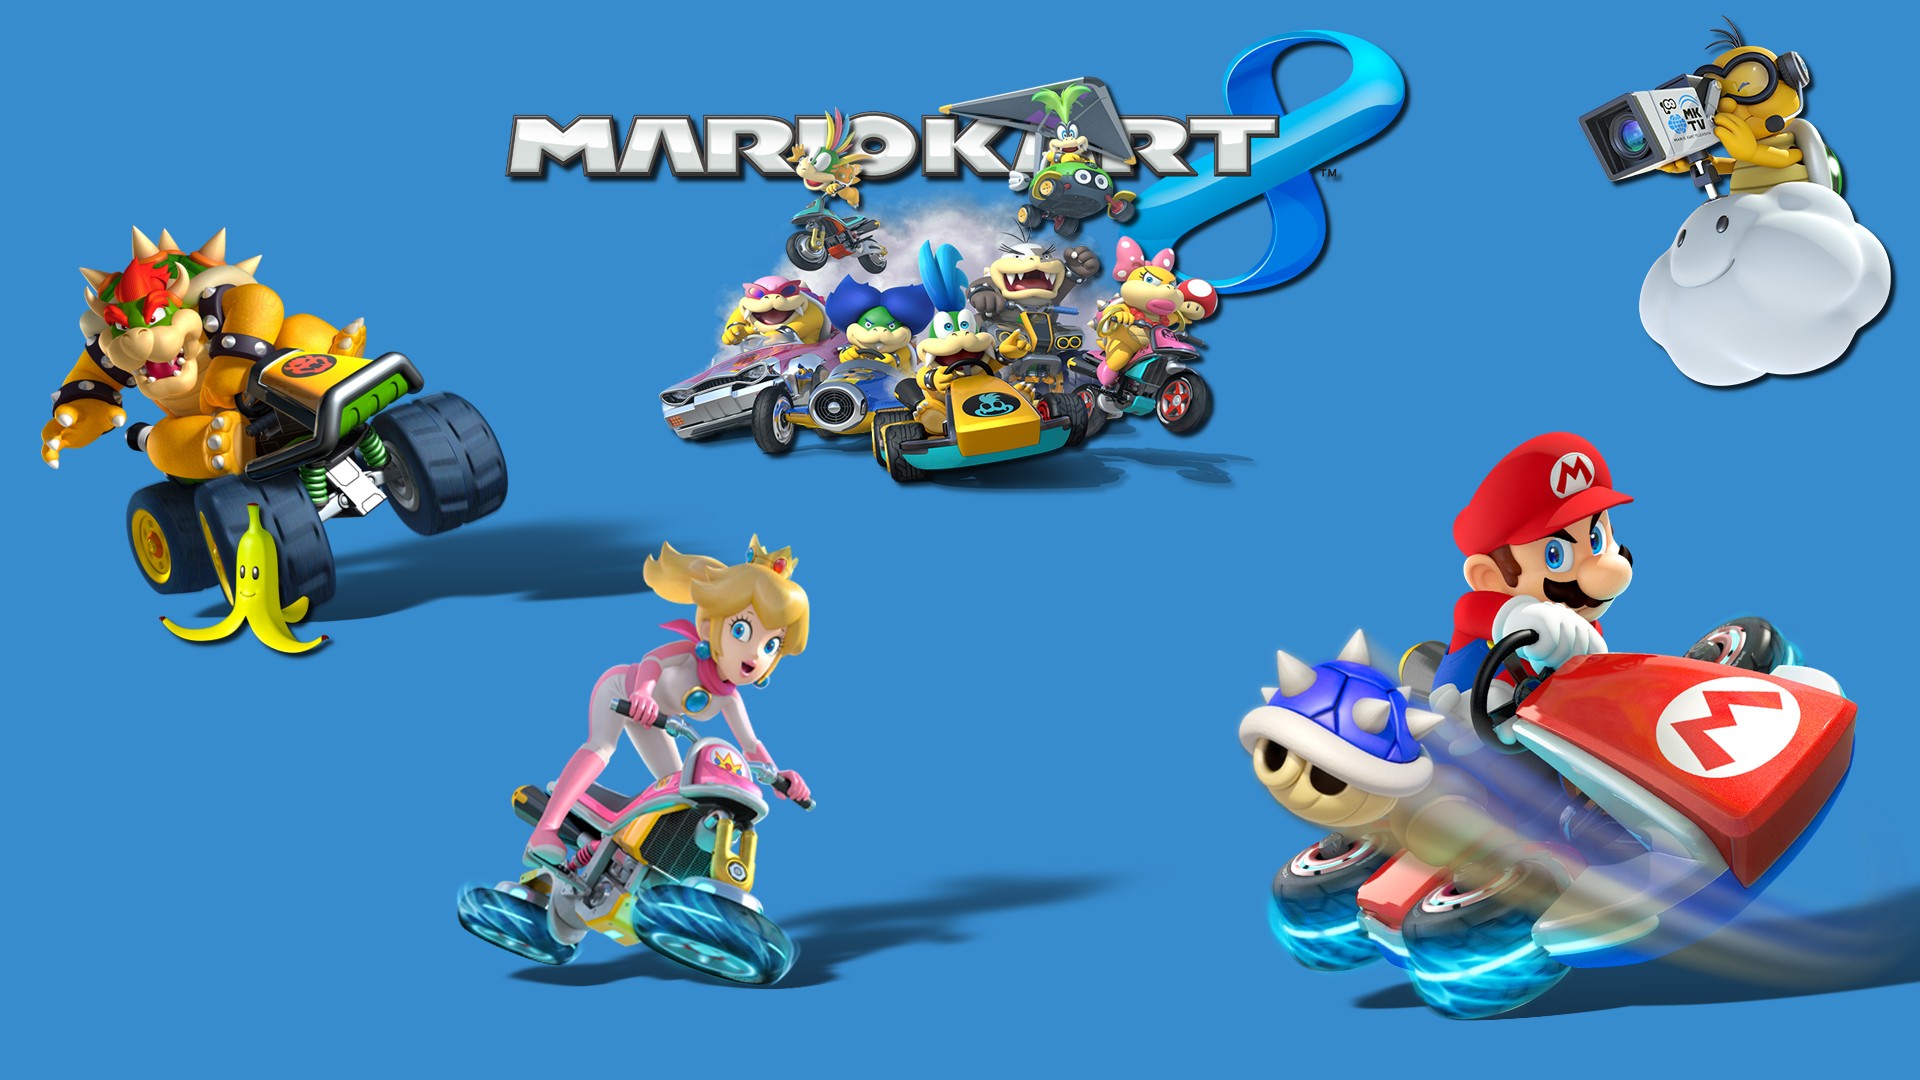 General 1920x1080 Mario Kart 8 video games Toad (character) Mario Bros. Nintendo Mario Kart video game characters blue background simple background vehicle video game art Princess Peach Bowser